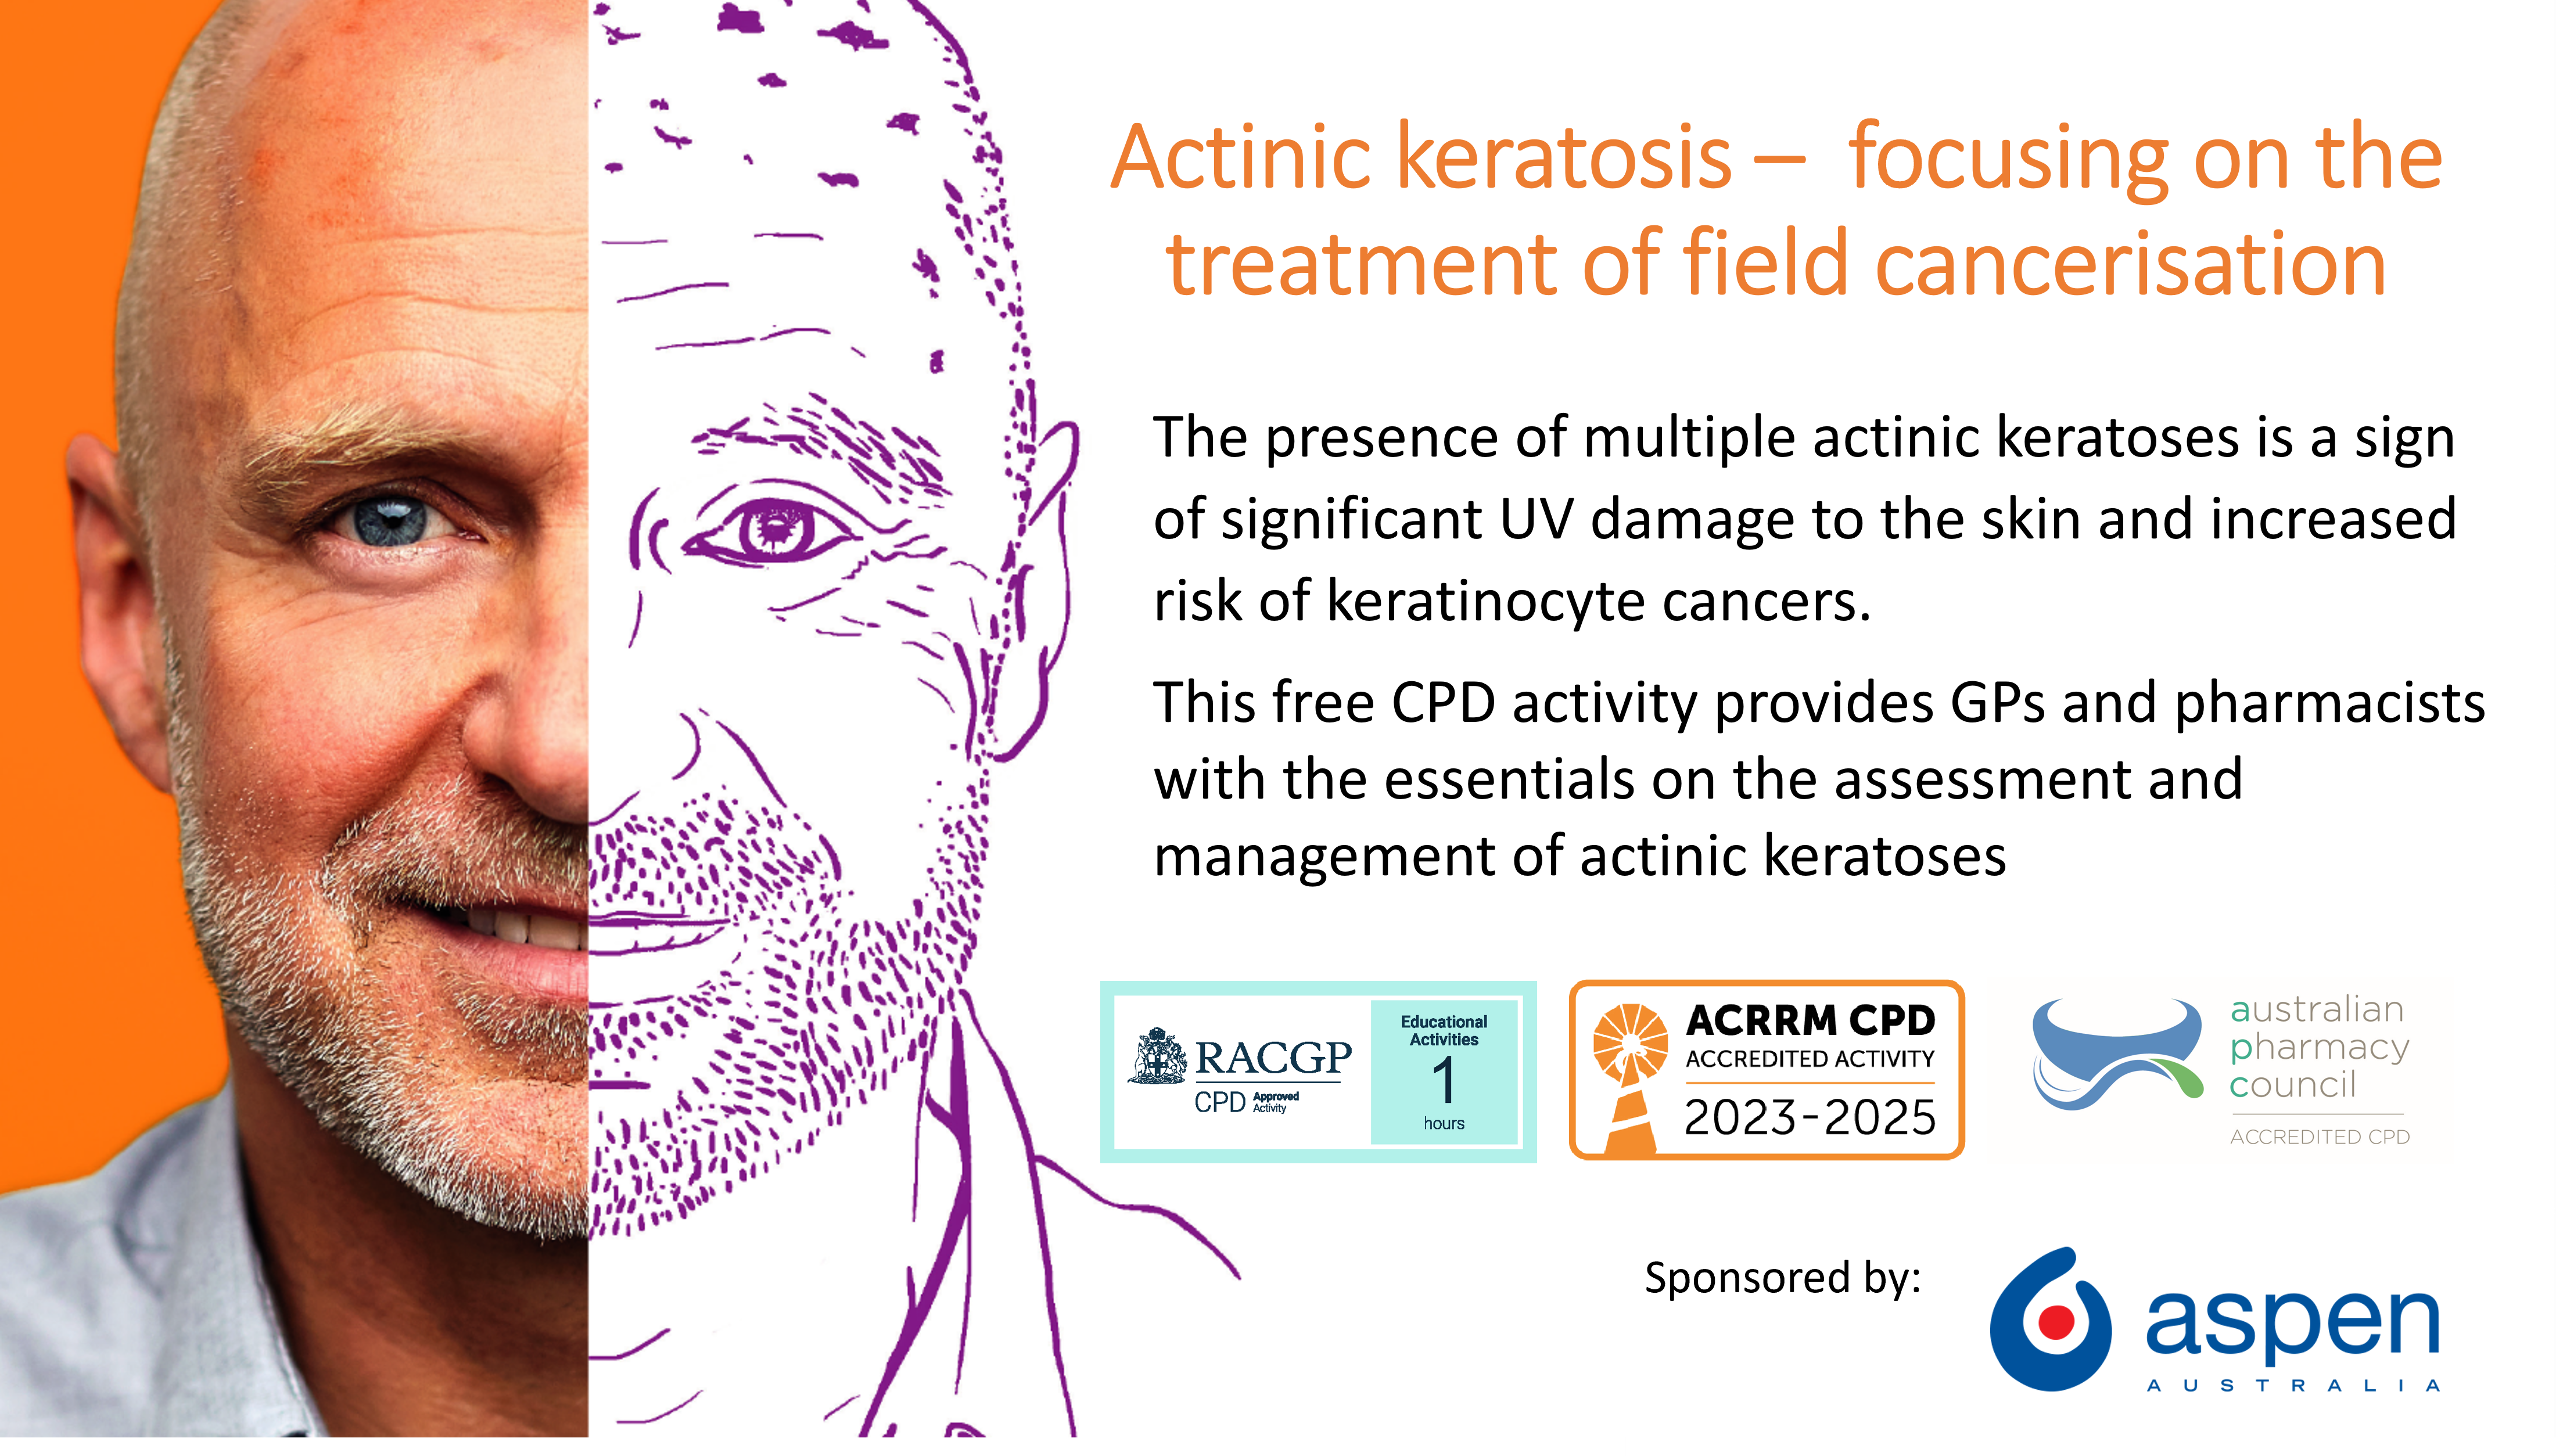 Actinic keratosis –  focusing on the treatment of field cancerisation